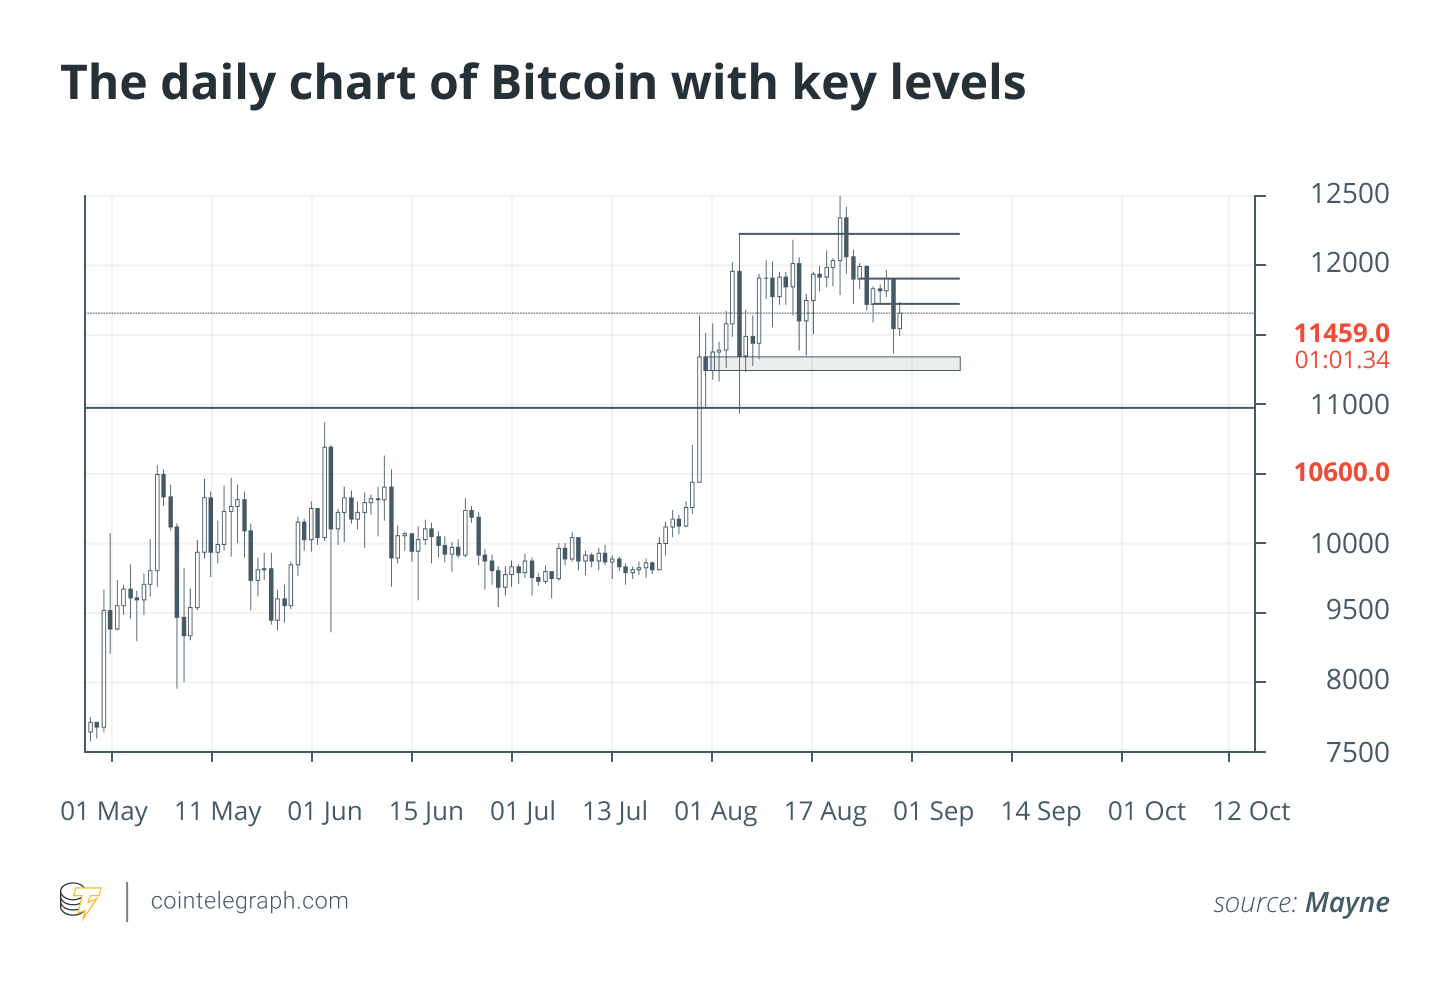 The daily chart of Bitcoin with key levels